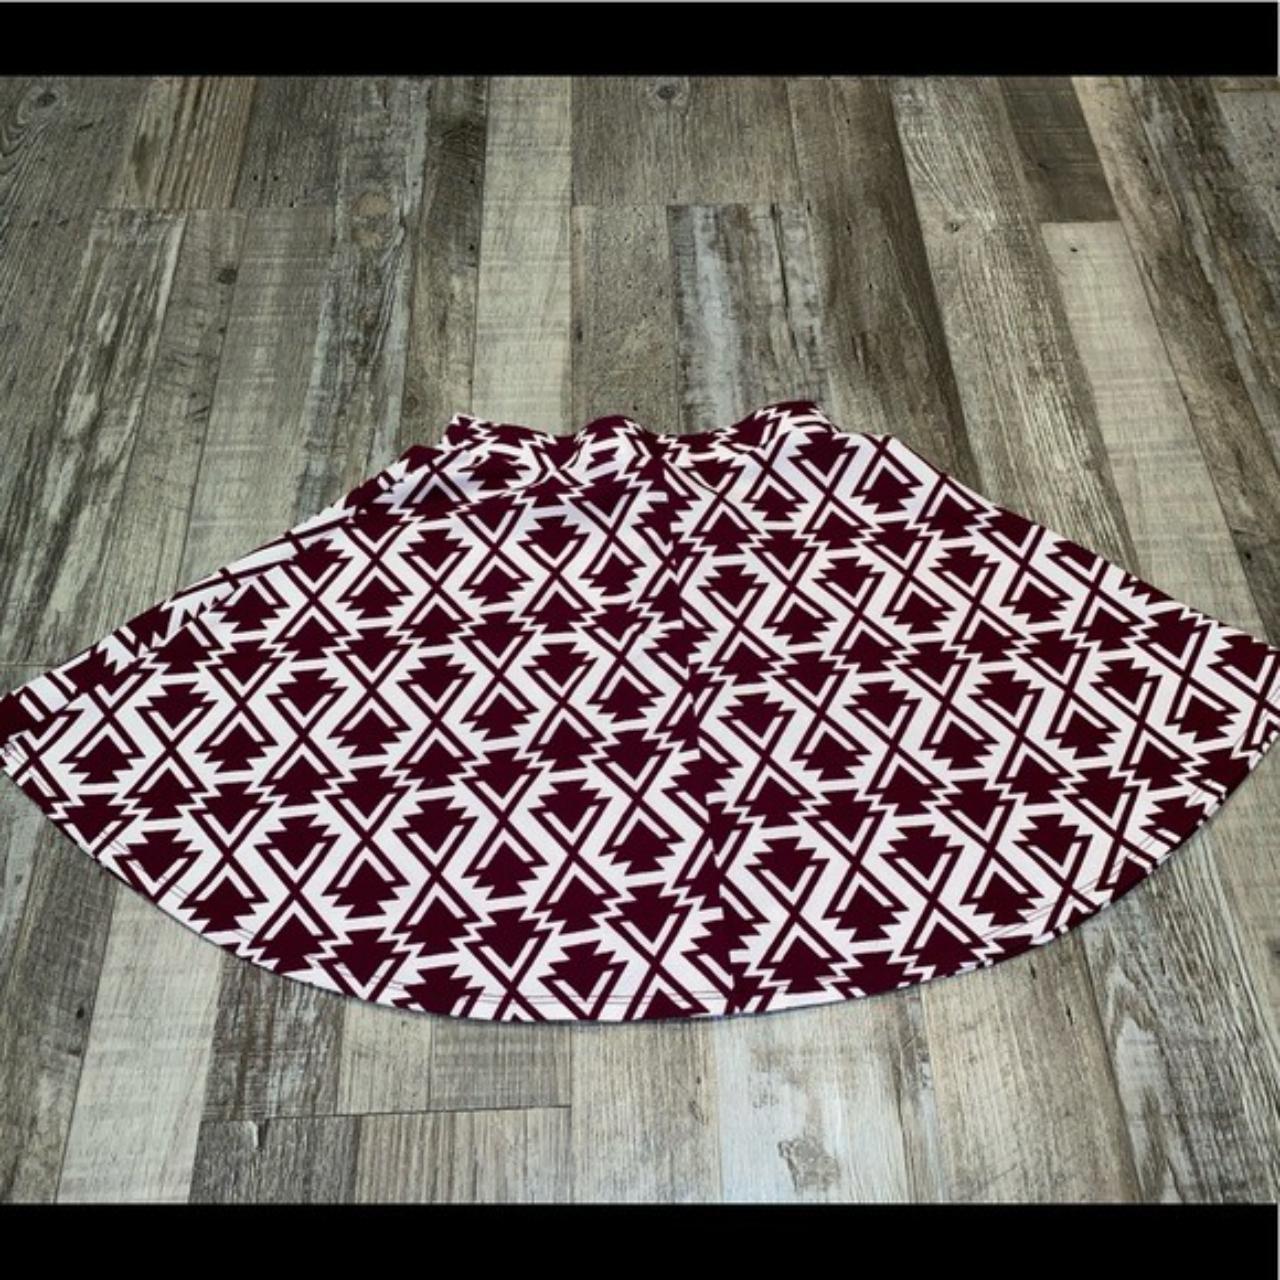 Product Image 1 - empyre skirt

open to bundles and